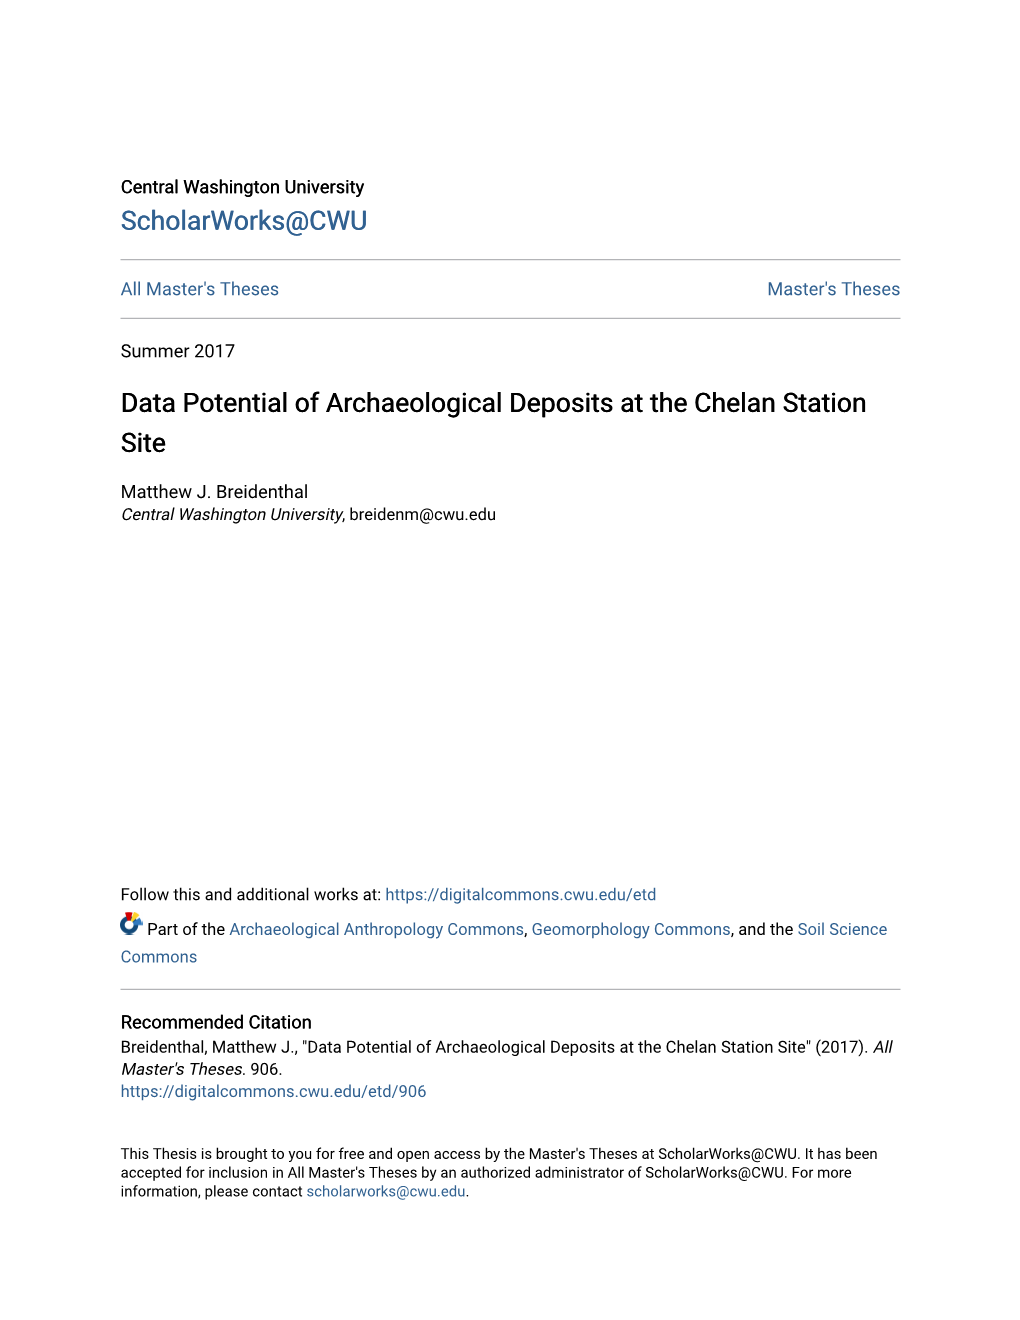 Data Potential of Archaeological Deposits at the Chelan Station Site